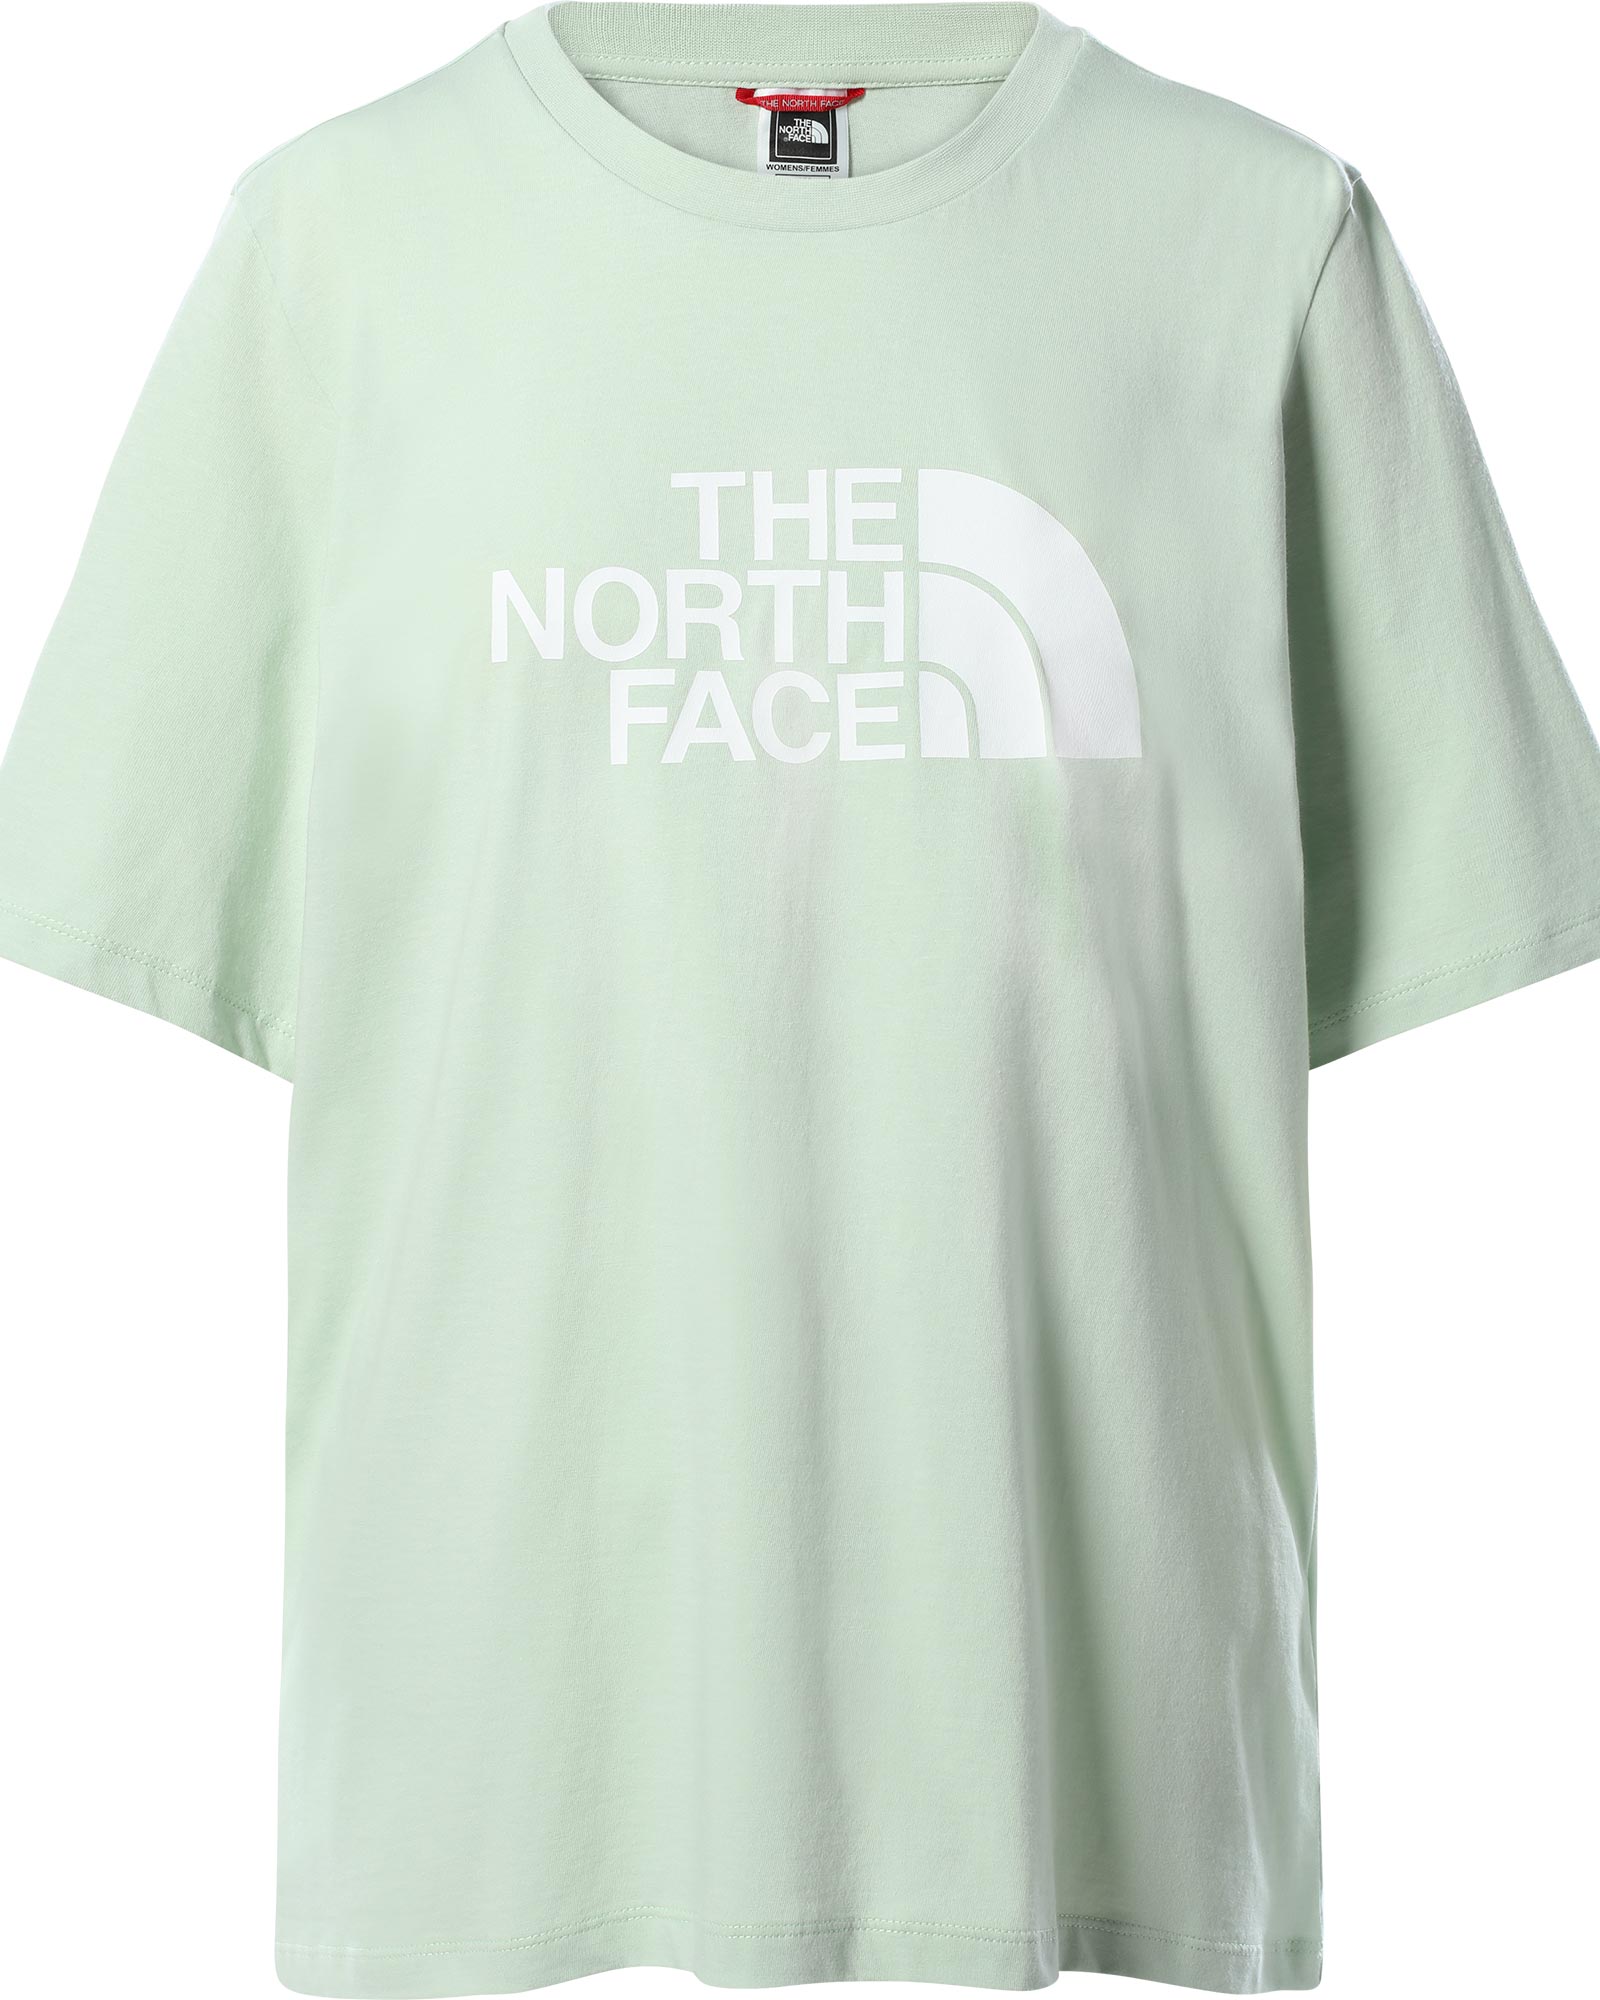 The North Face BF Easy Women’s T Shirt - Green Mist S